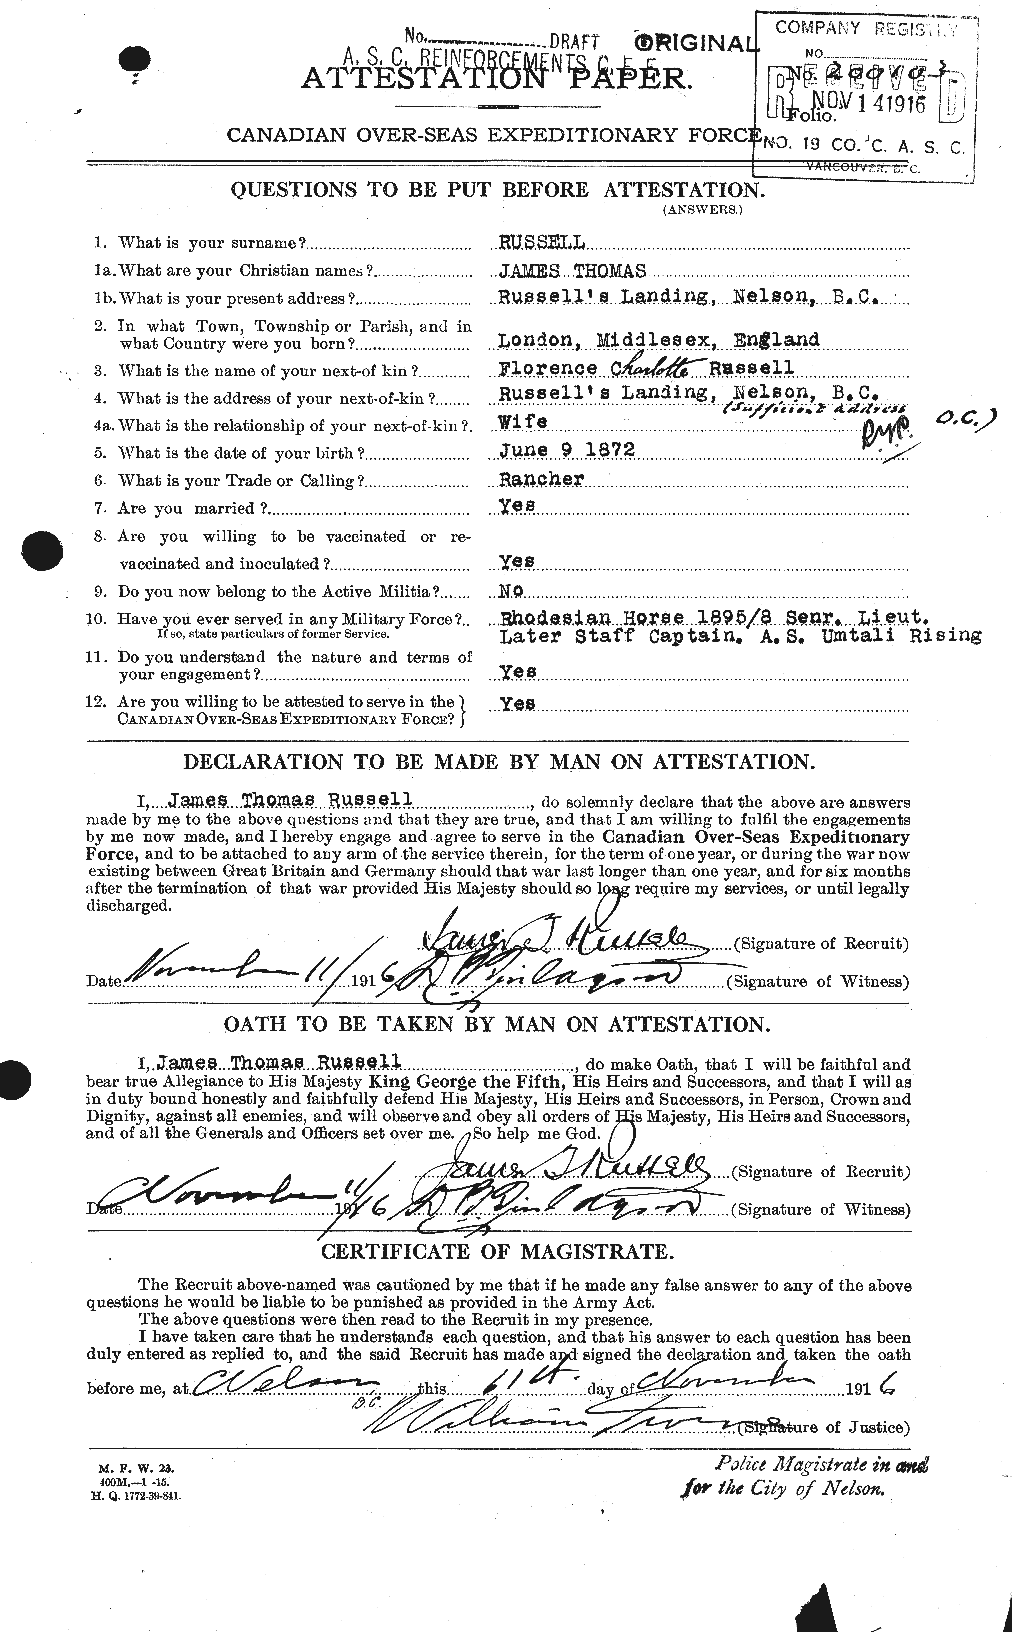 Personnel Records of the First World War - CEF 619079a